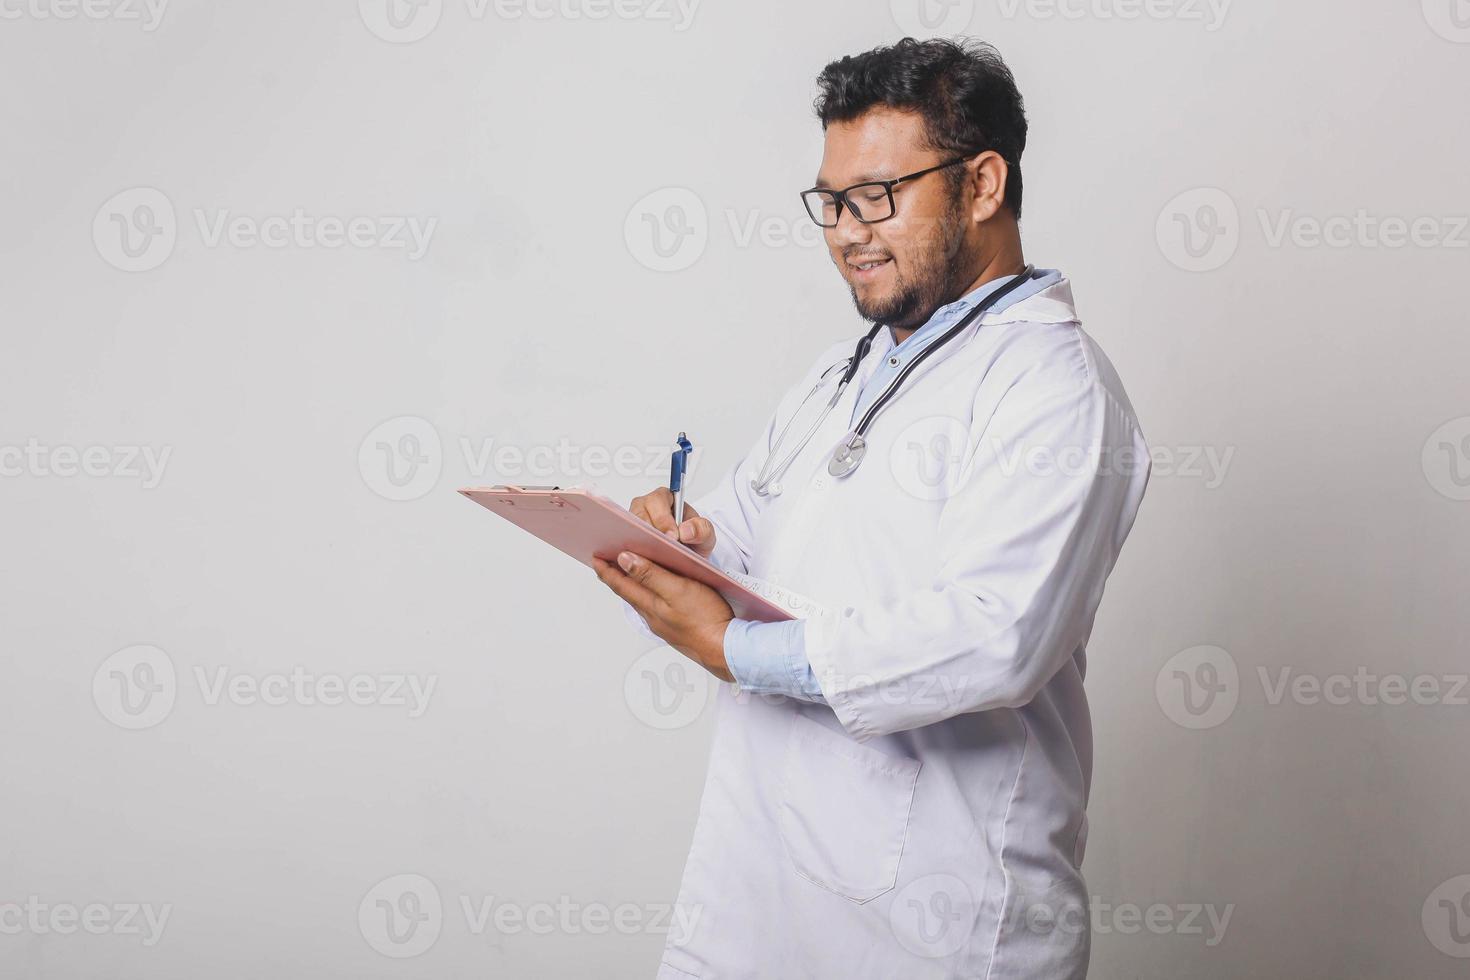 Cheerful male doctor taking medical notes isolated on white background with copy space photo